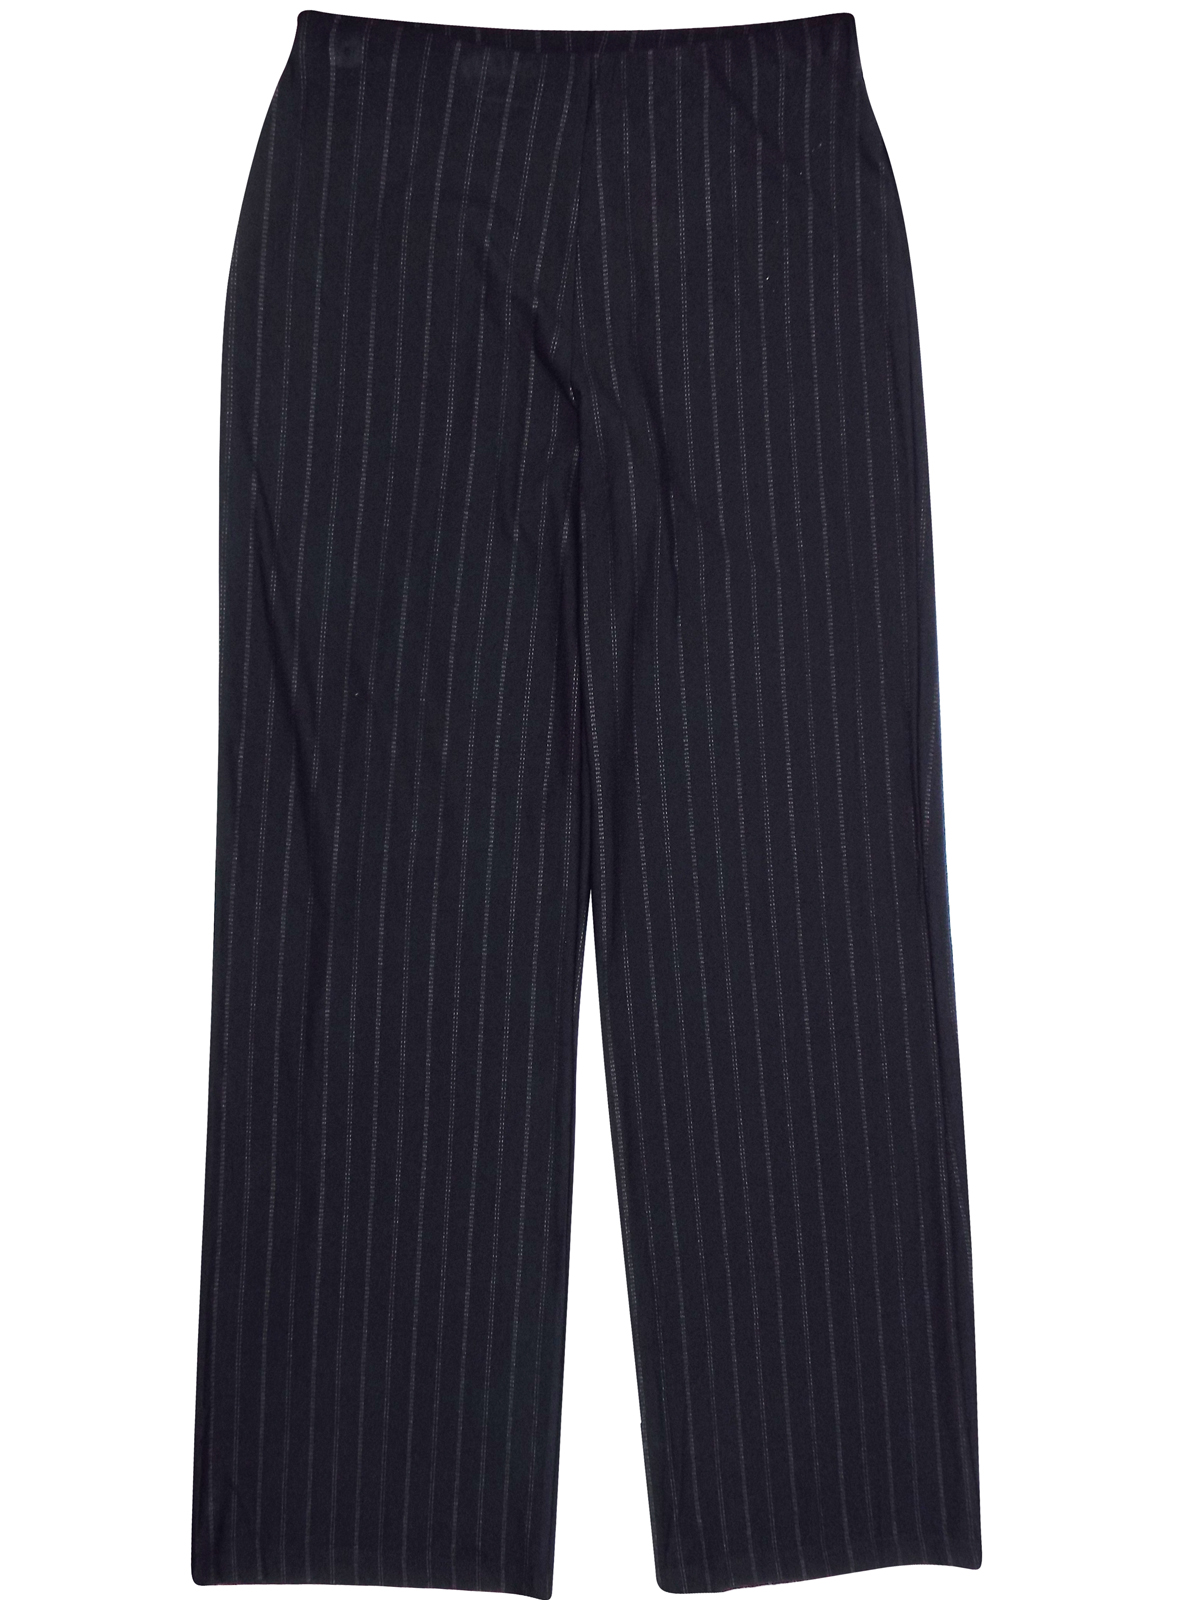 Marks and Spencer - - M&5 BLACK Pinstripe Wide Leg Trousers - Size 12 to 18